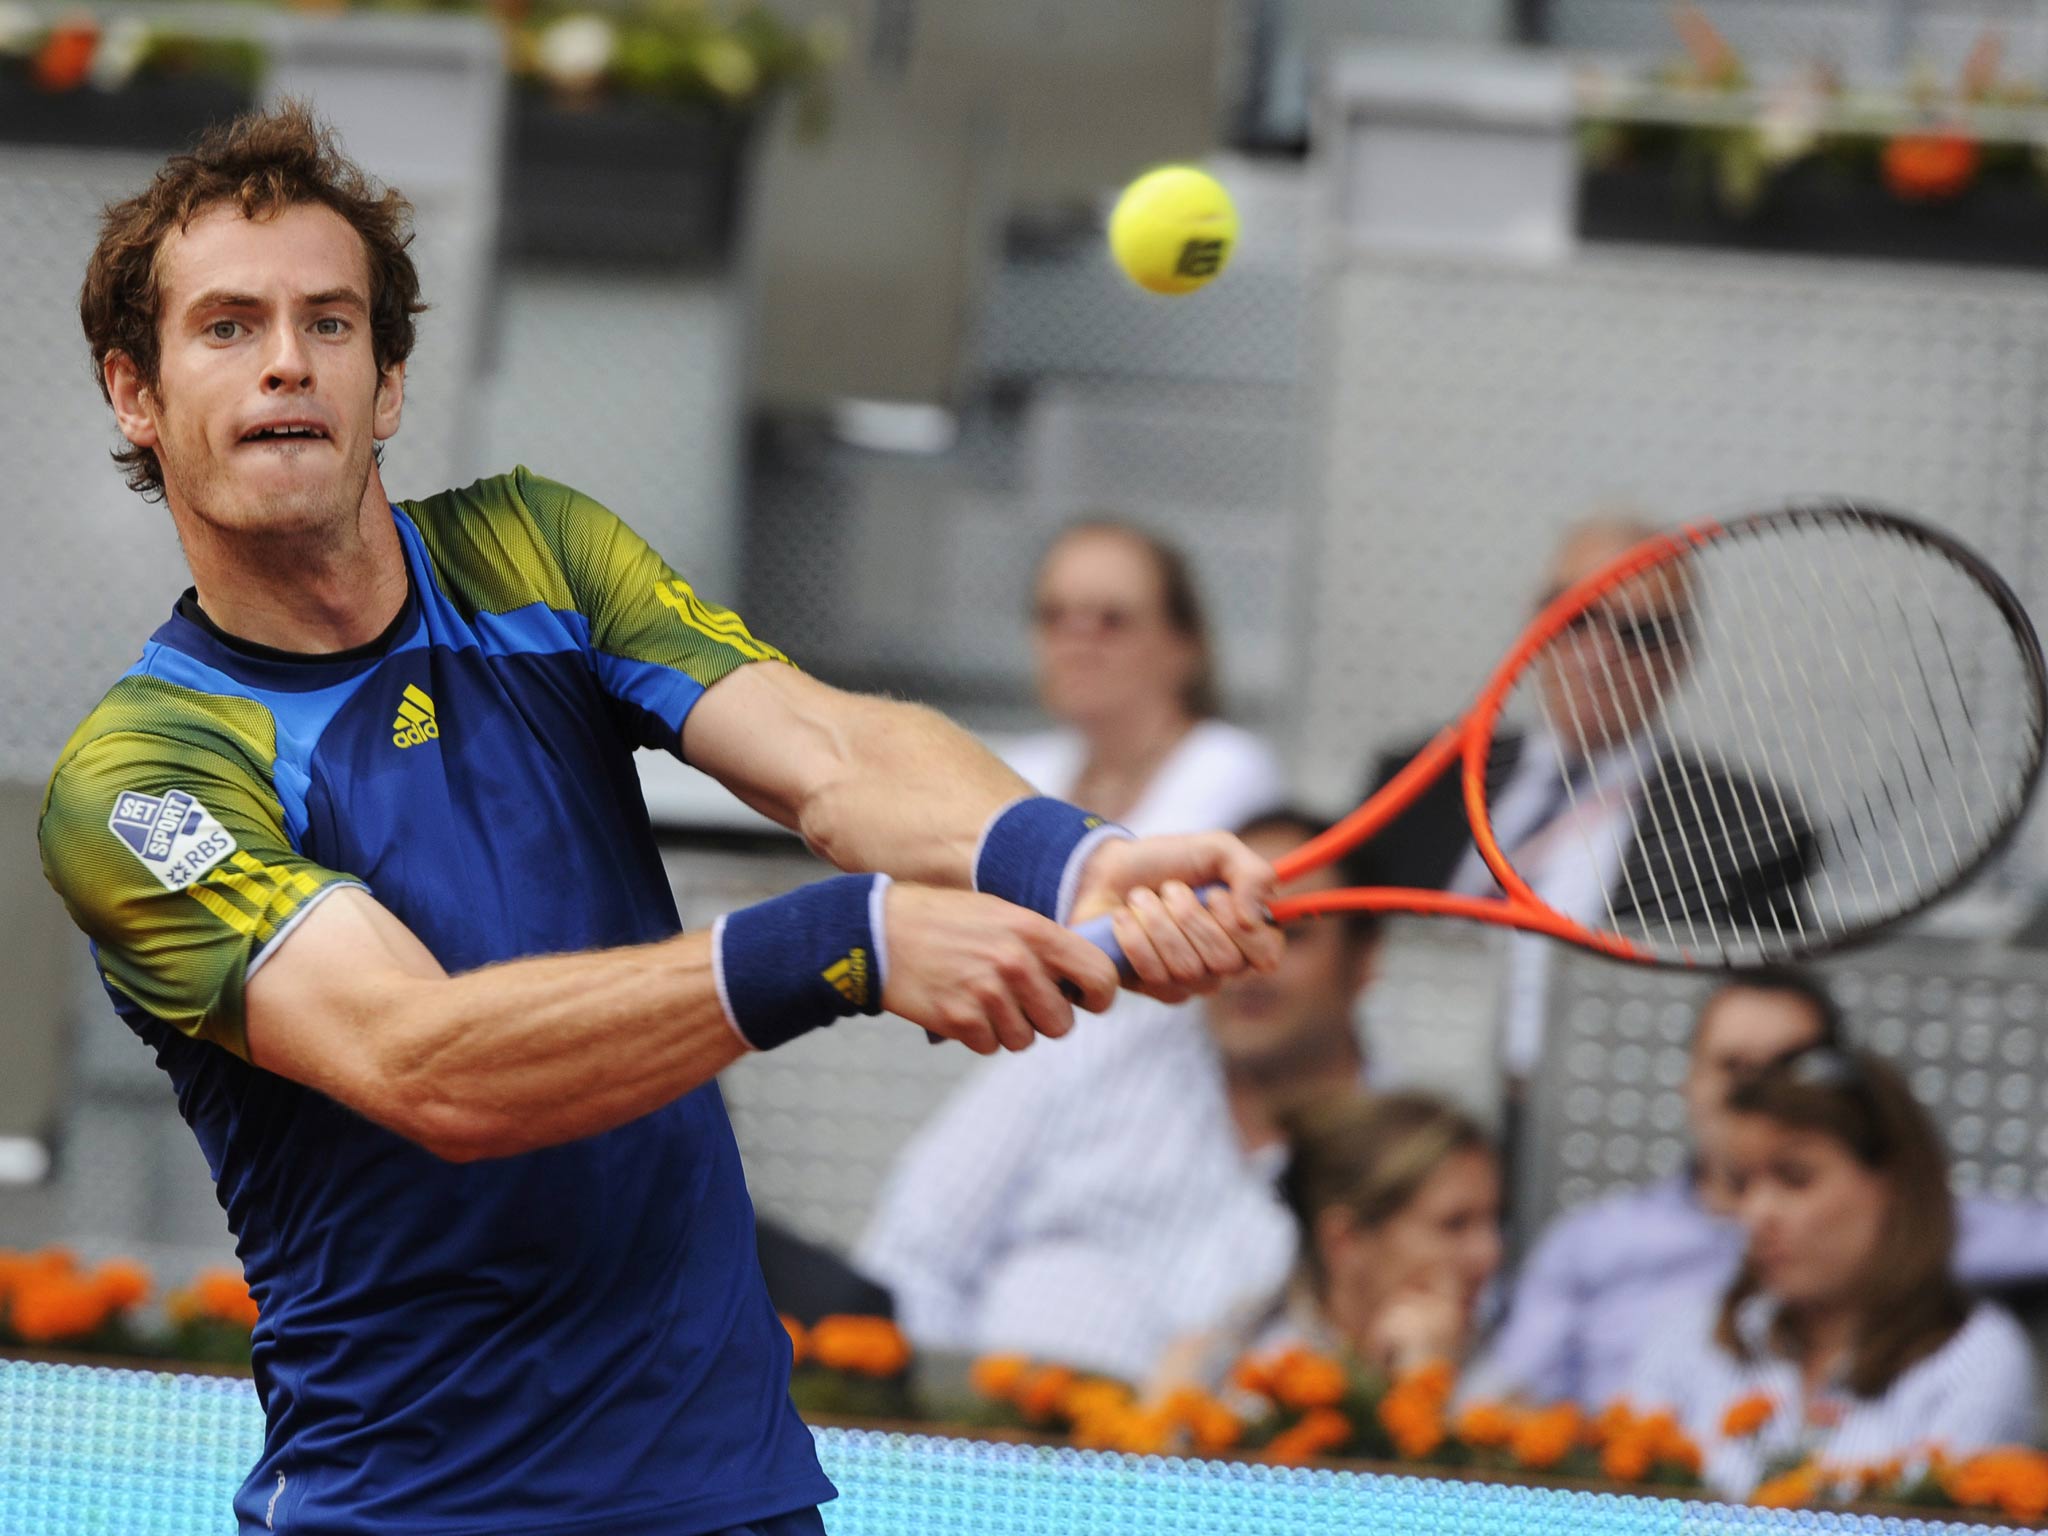 Andy Murray in action at the Madrid Masters